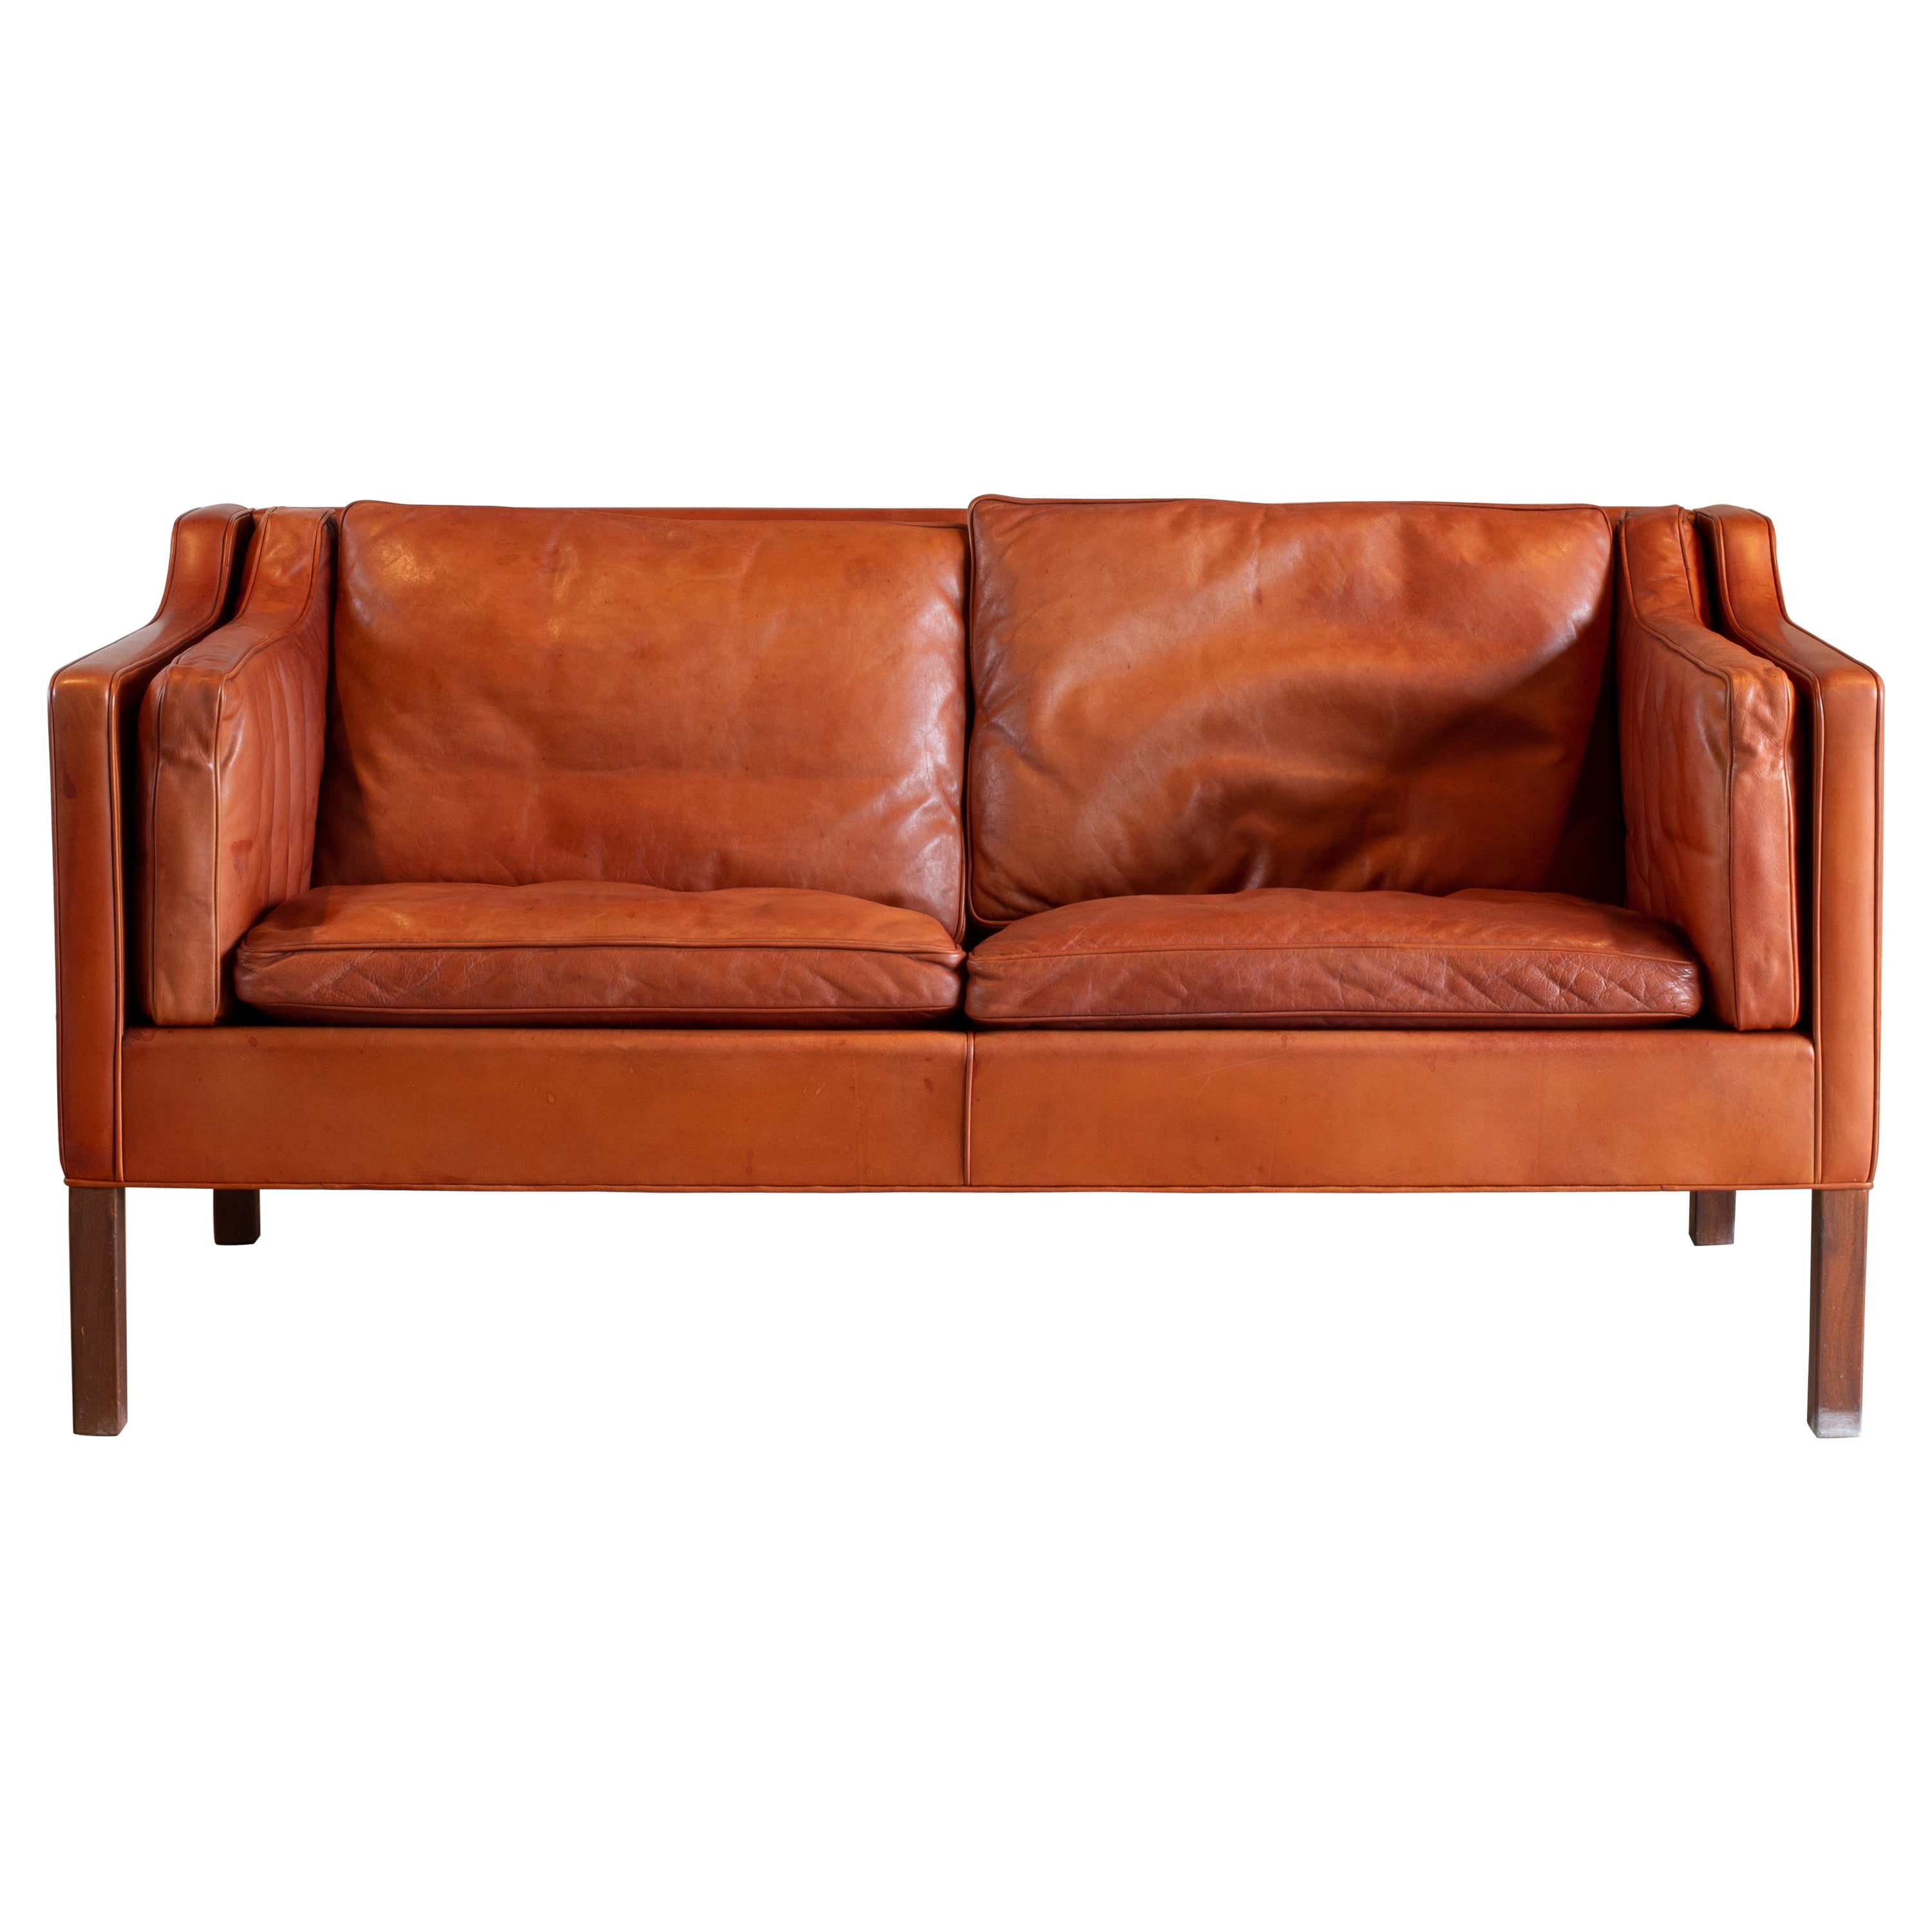 Børge Mogensen Two Seater Sofa for Fredericia Furniture